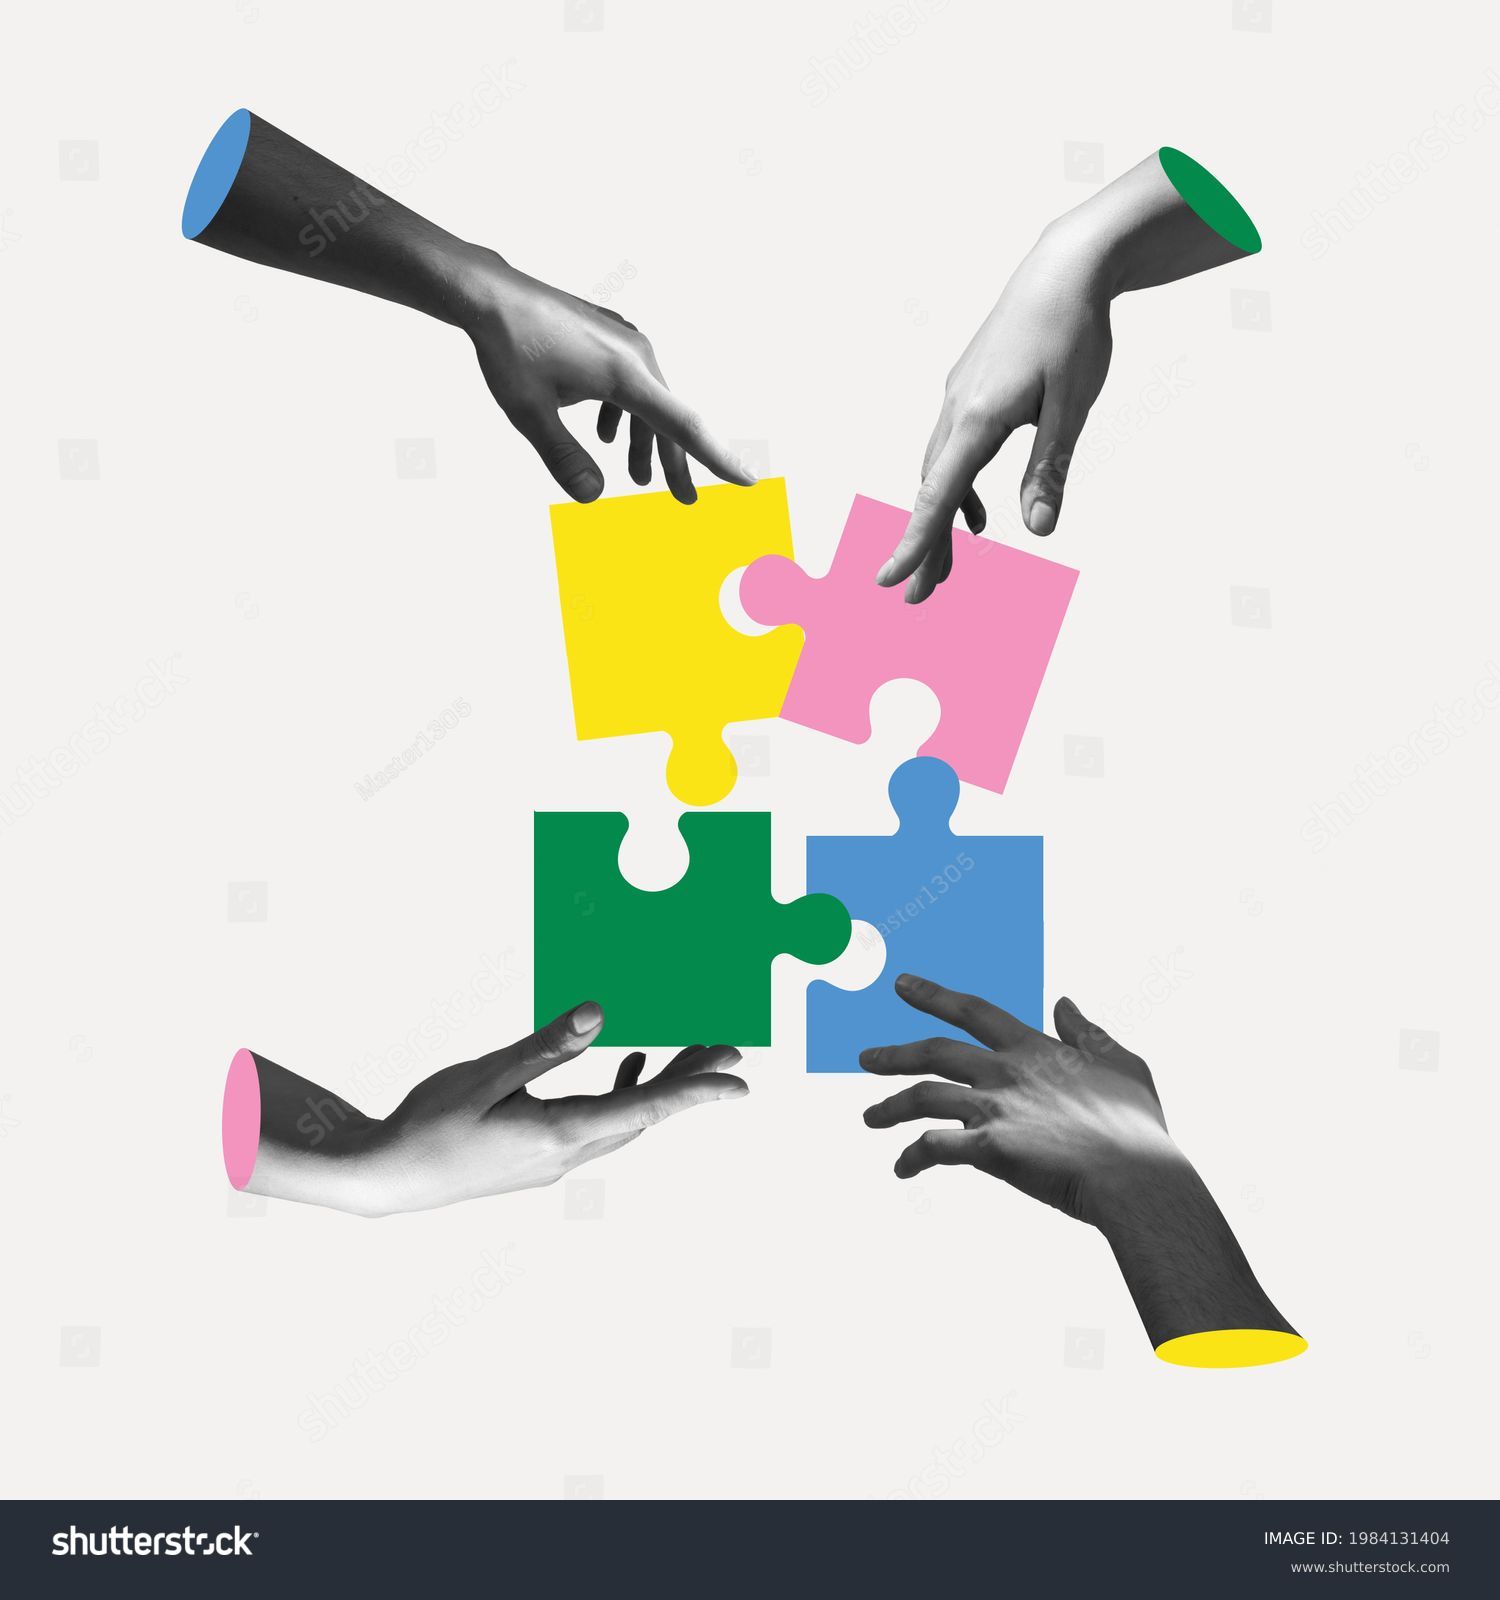 Male and female hands aesthetic on light background with colored puzzles, artwork. Concept of team work, business, community and professional occupation. Symbolism and surrealism. #1984131404